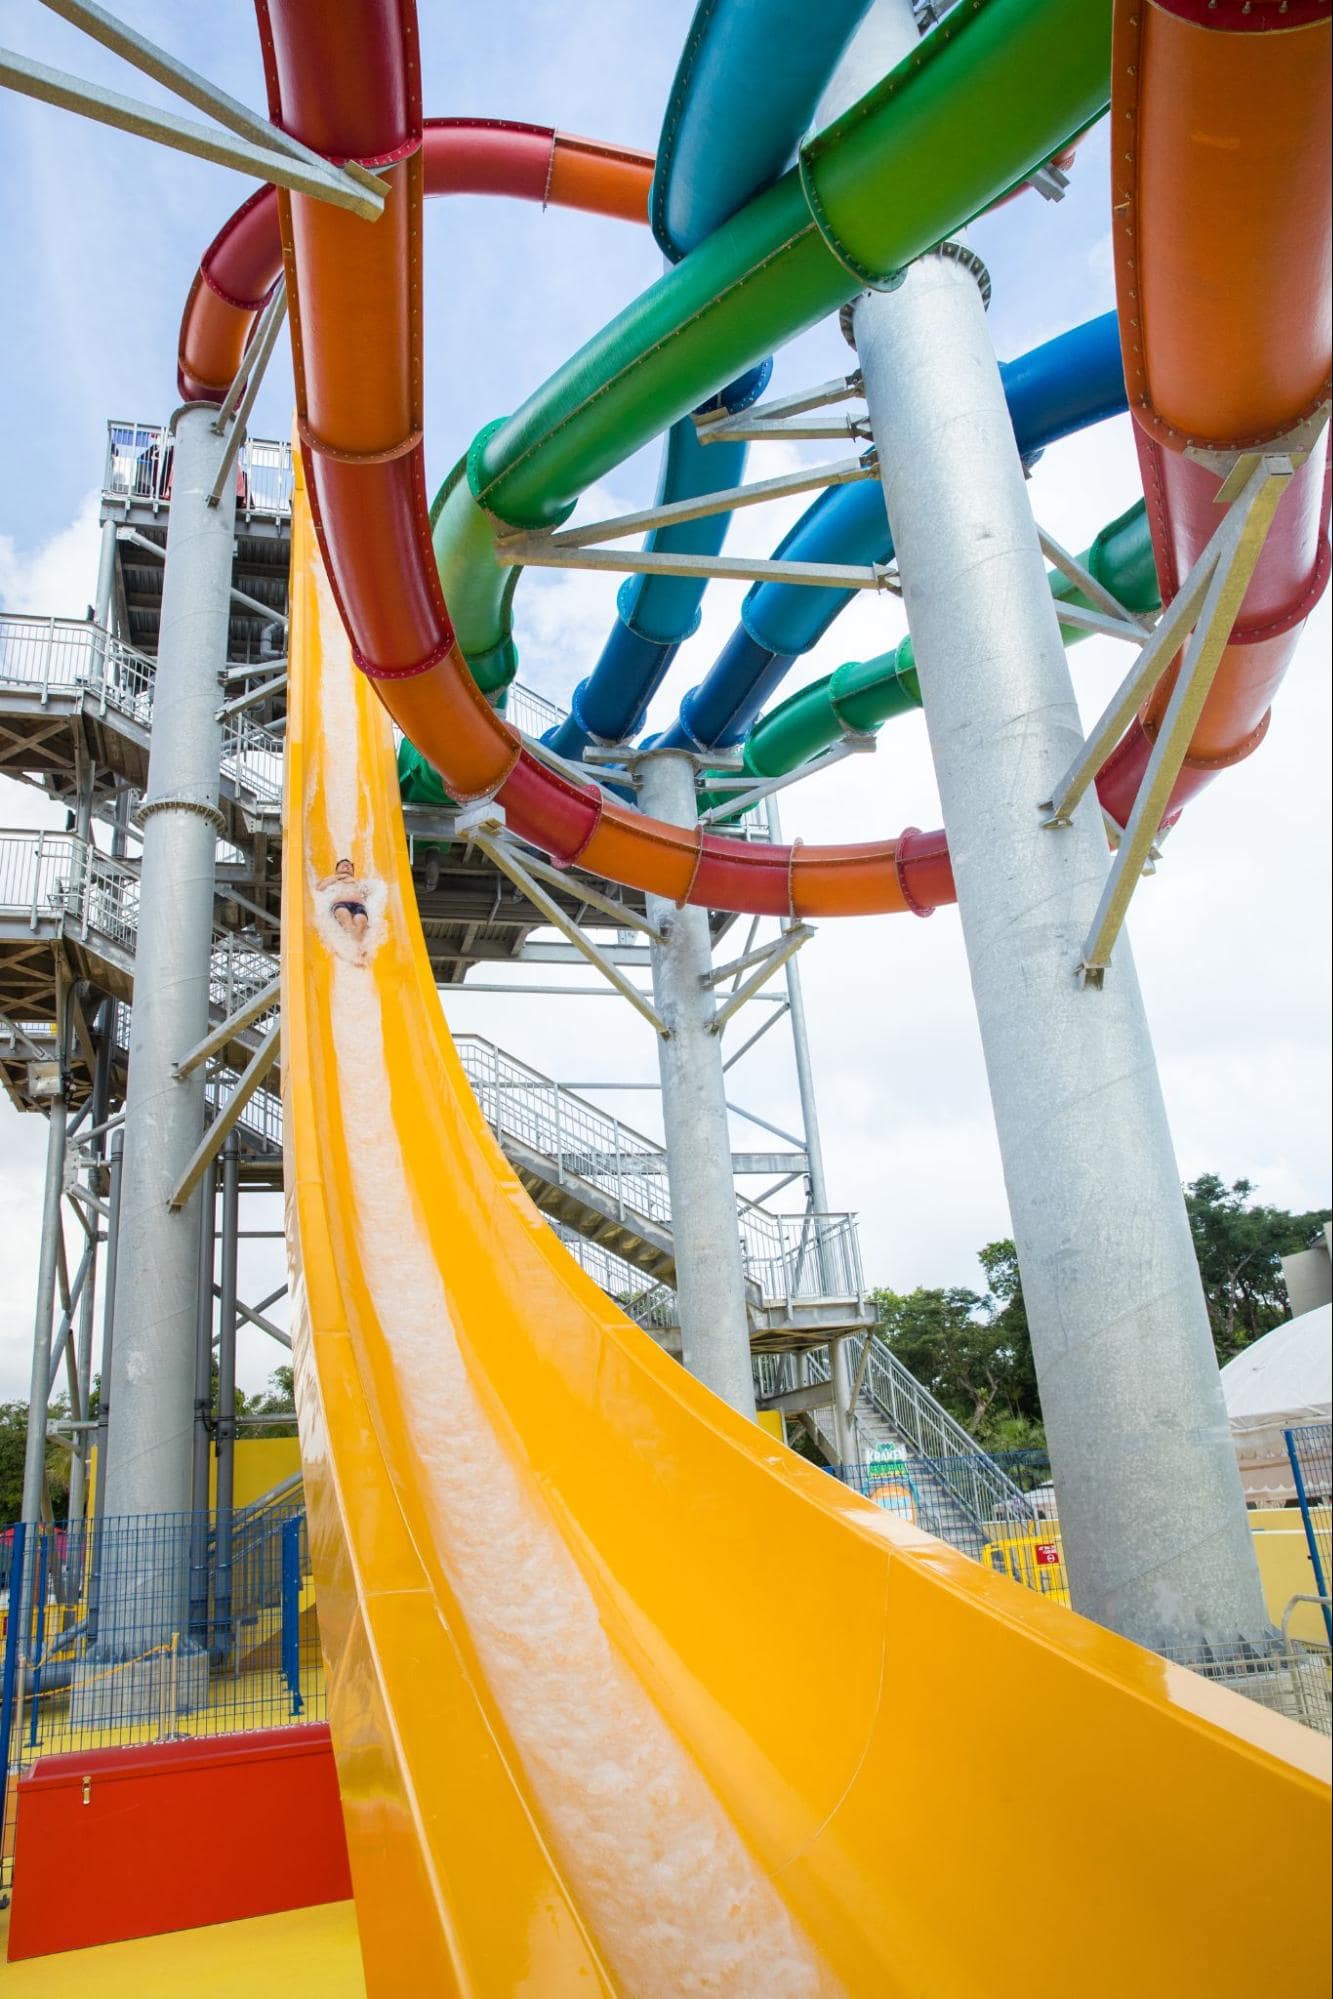 Water Parks in Singapore - Wild Wild Wet Free Fall Slide